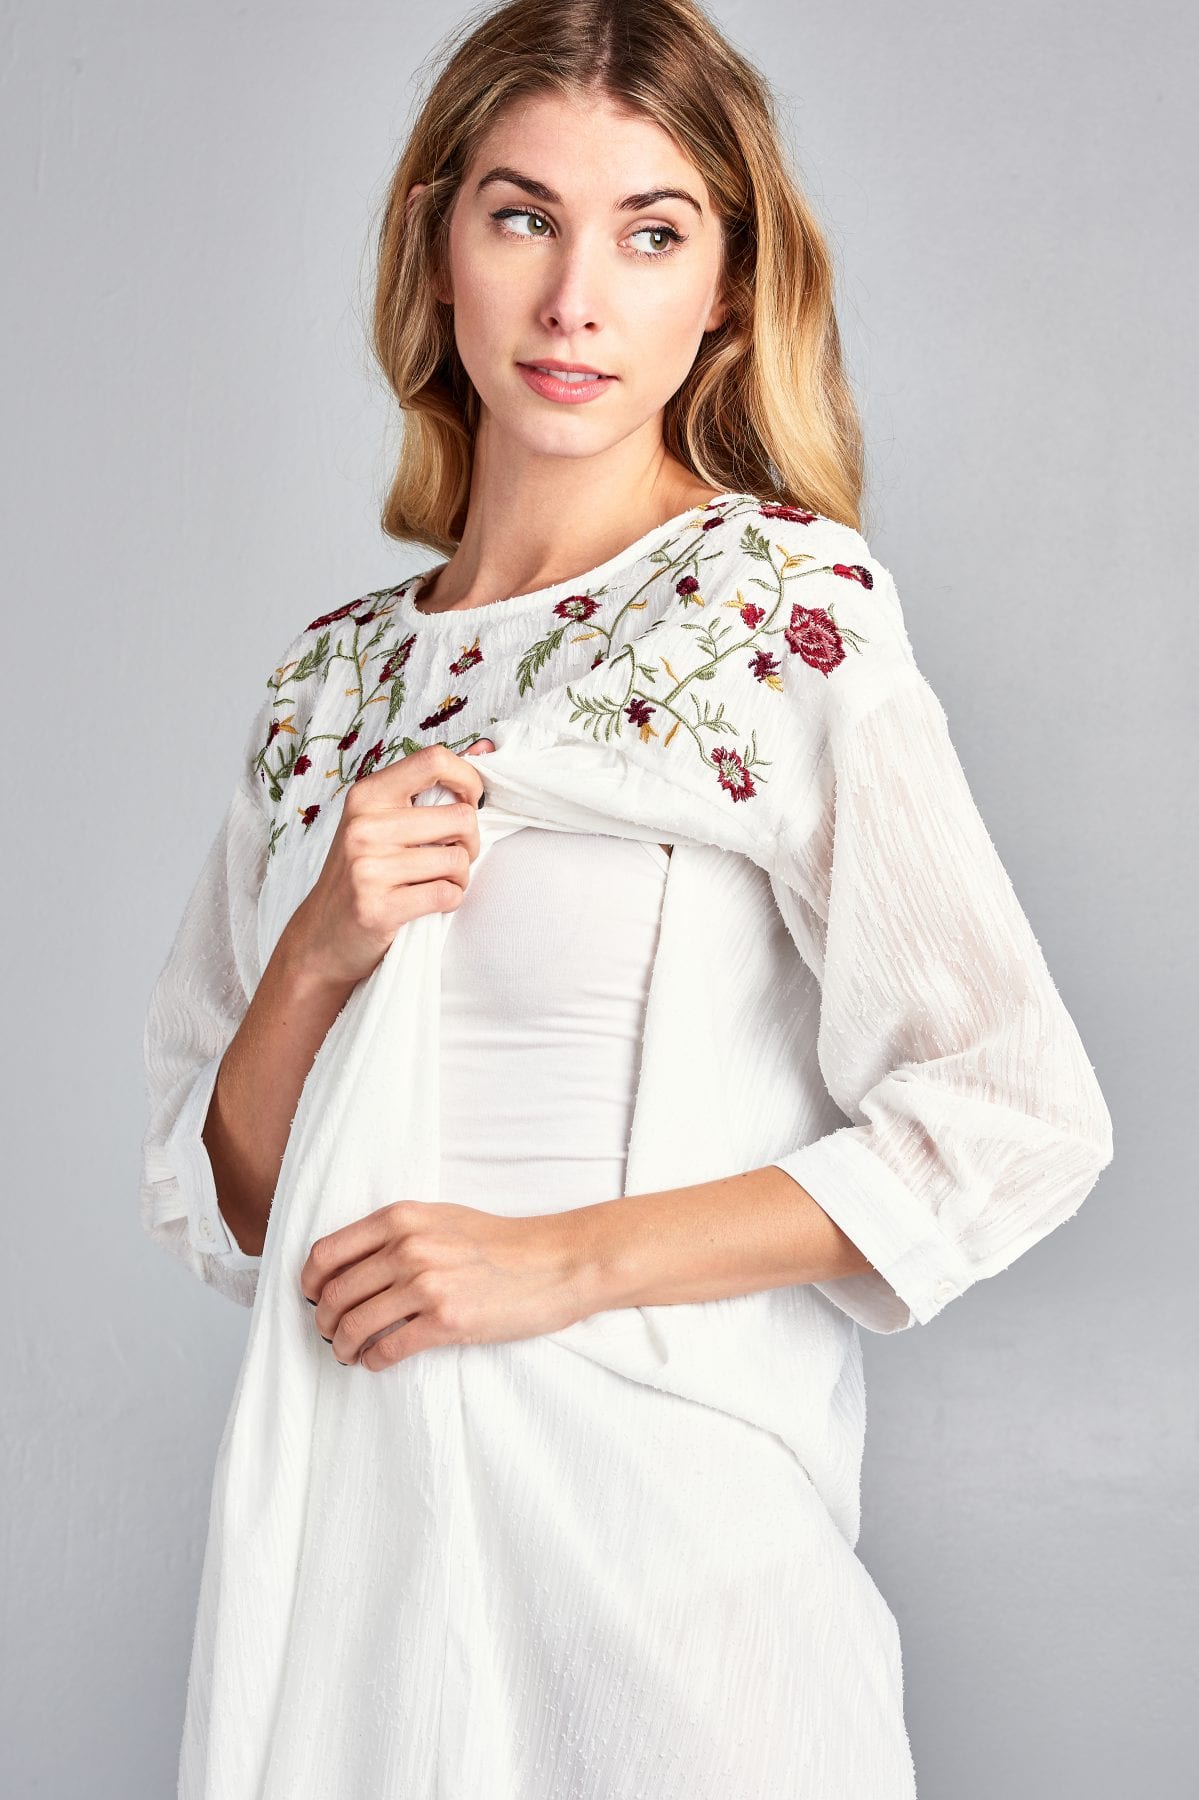 Image of Embroidered Modest Nursing Dress, White Summer Dress with Zippers on Both Sides, Breastfeeding, Postnatal, Maternity